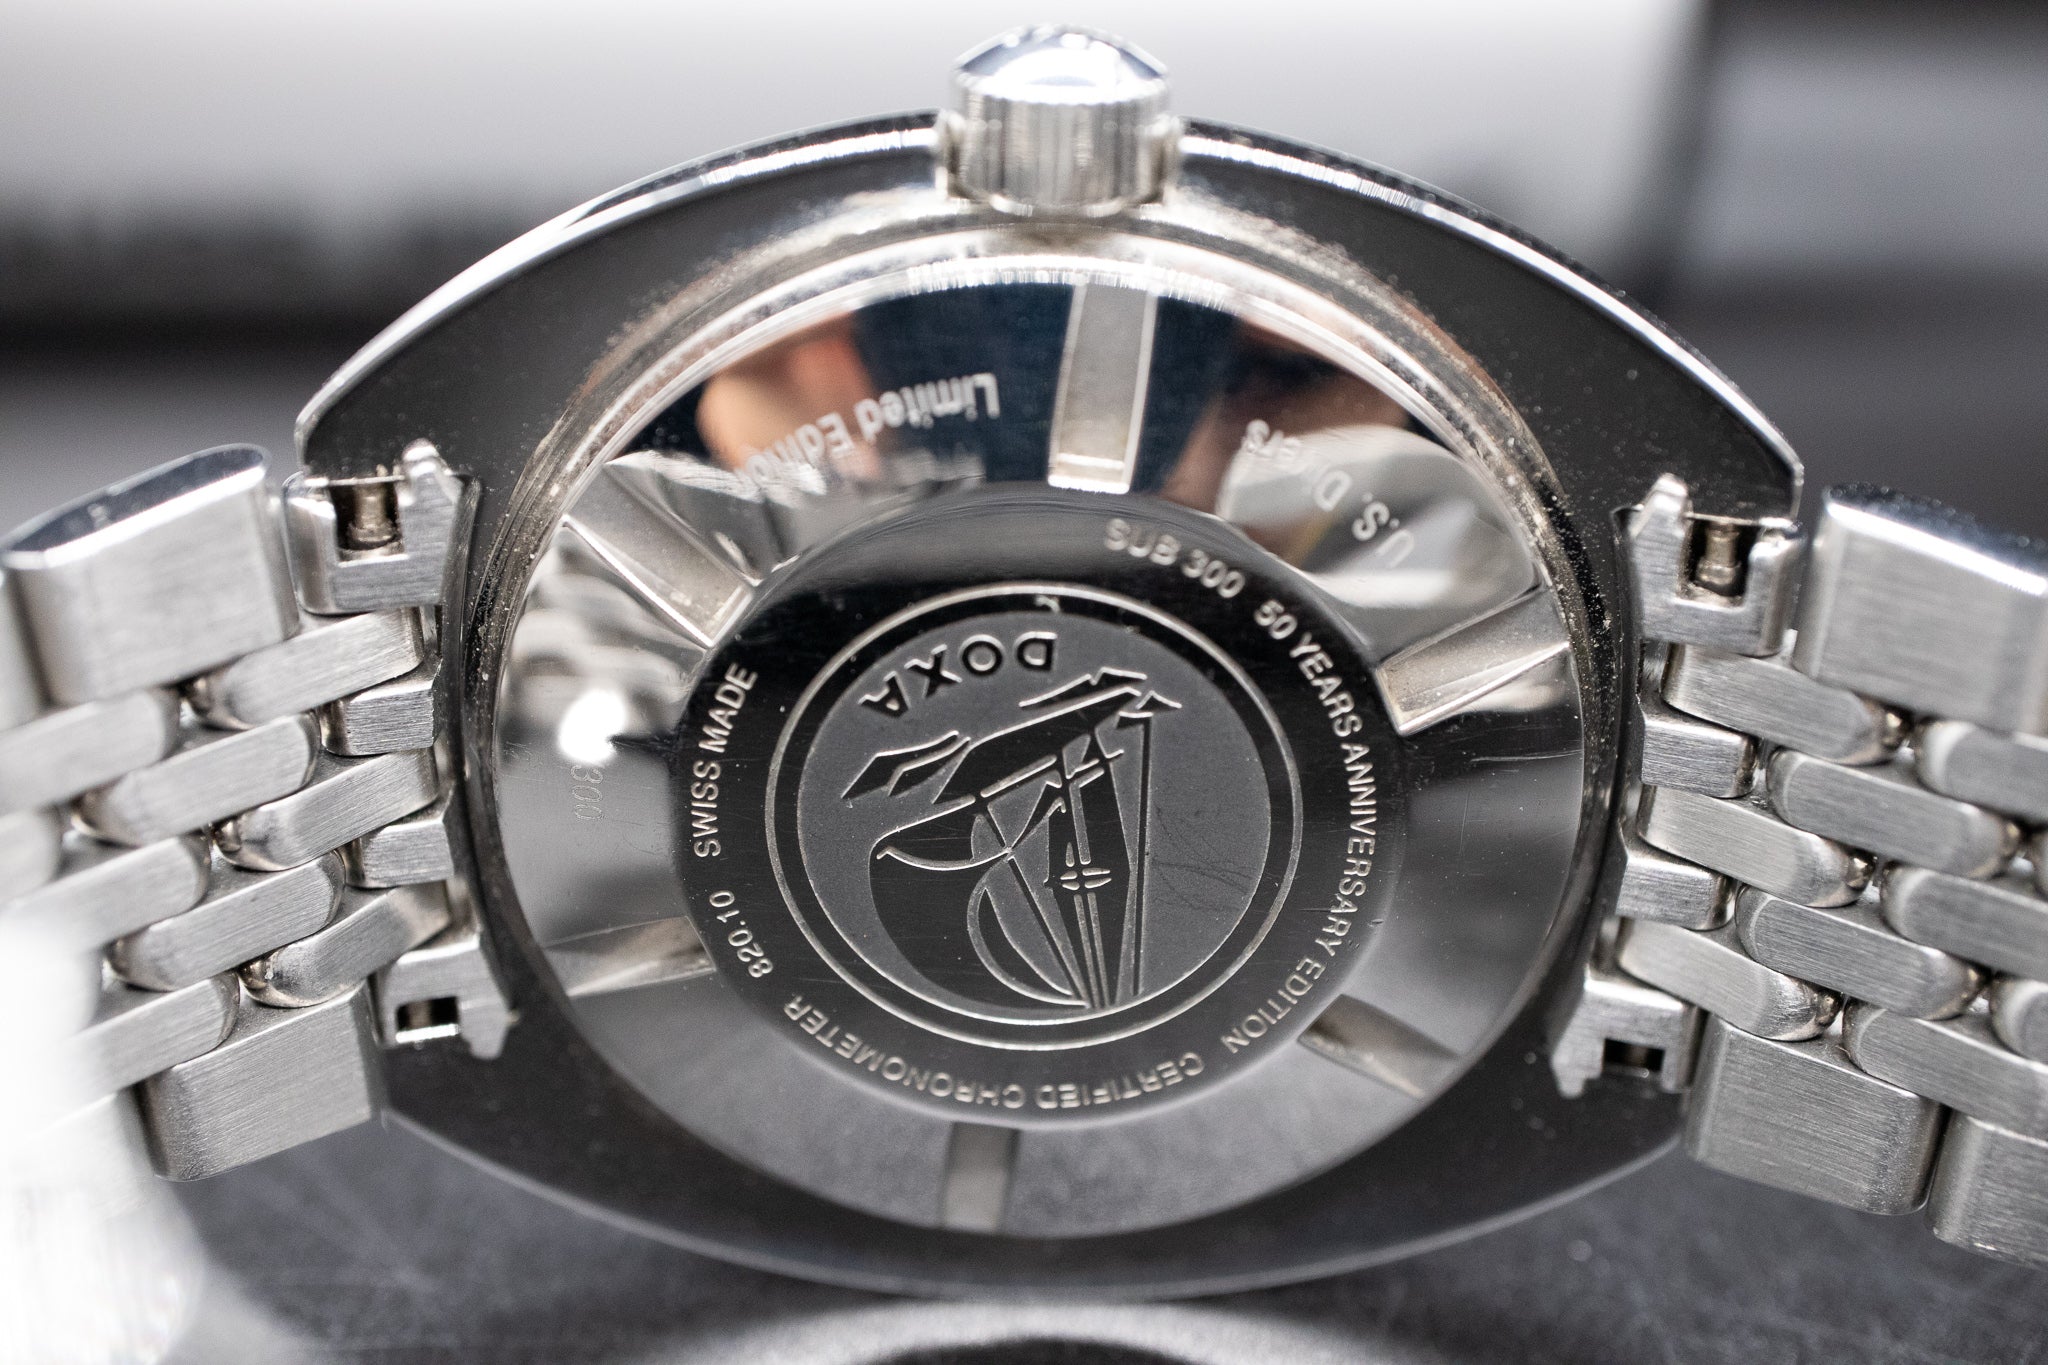 Pre-Owned Doxa Sub 300 Searambler ‘Silver Lung’ Limited Reissue Anniversary